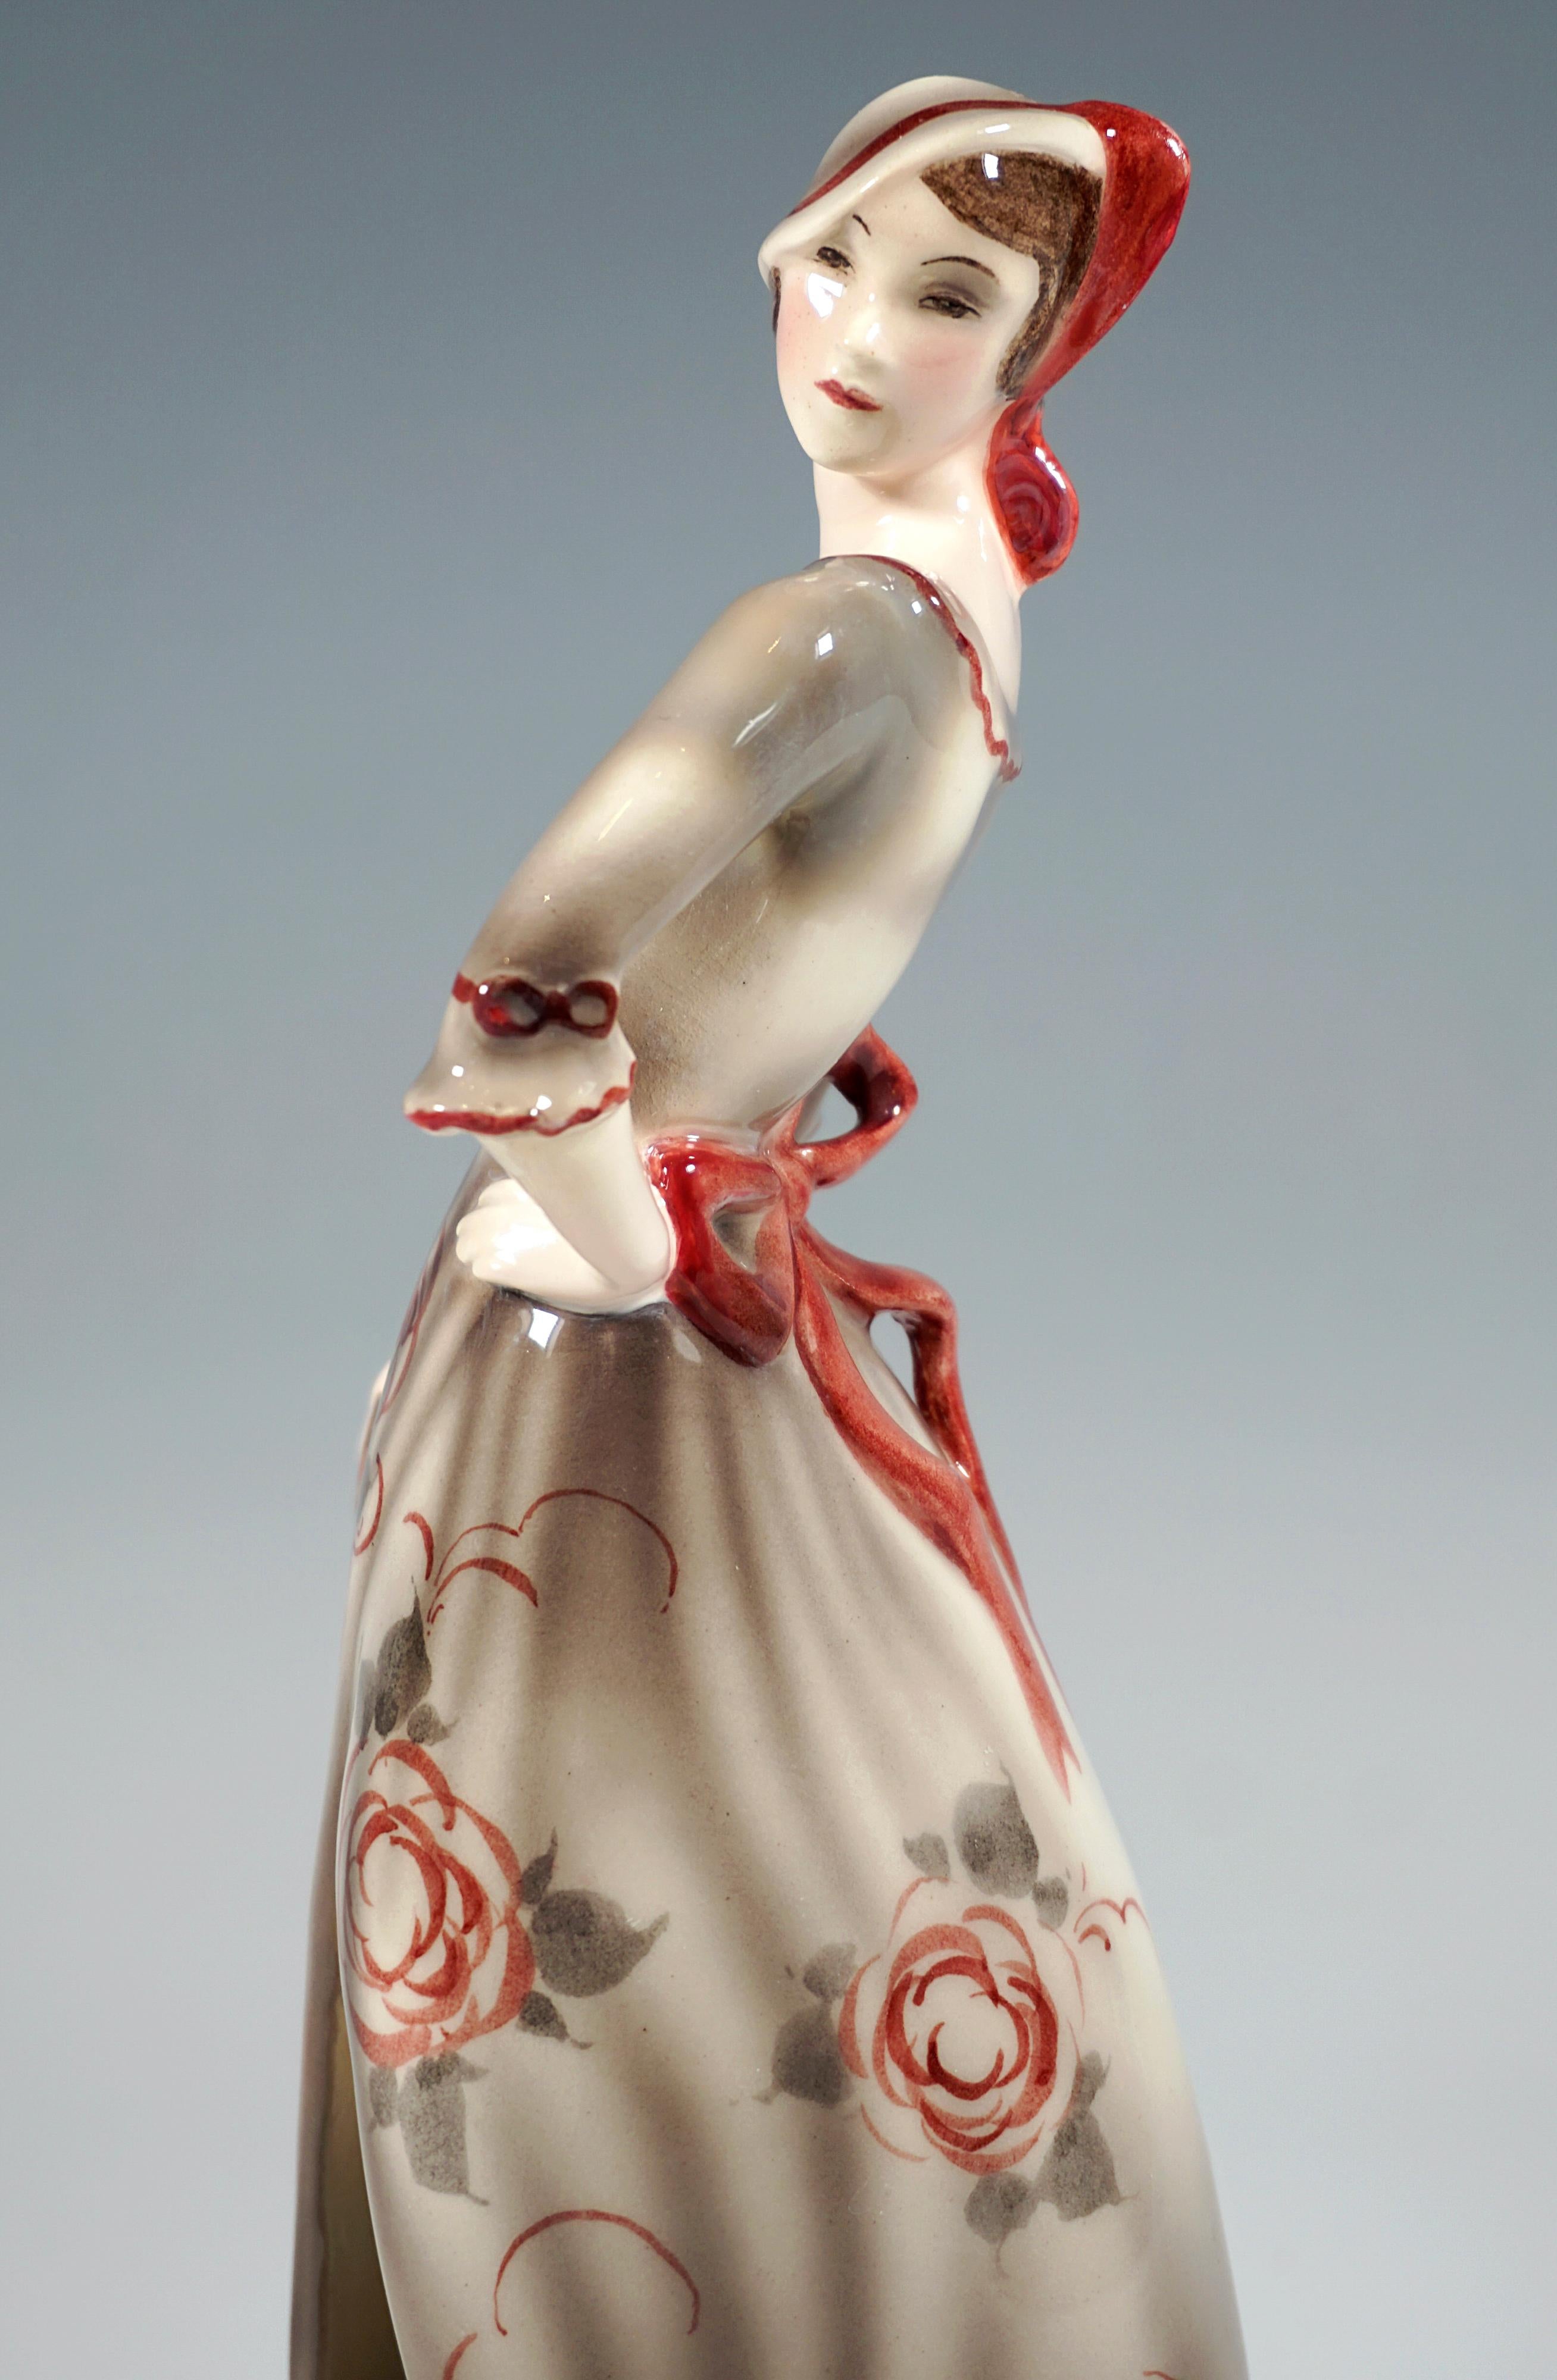 Hand-Crafted Goldscheider Vienna Art Déco Figure Elegant Lady Posing, By Claire Weiss, c 1931 For Sale